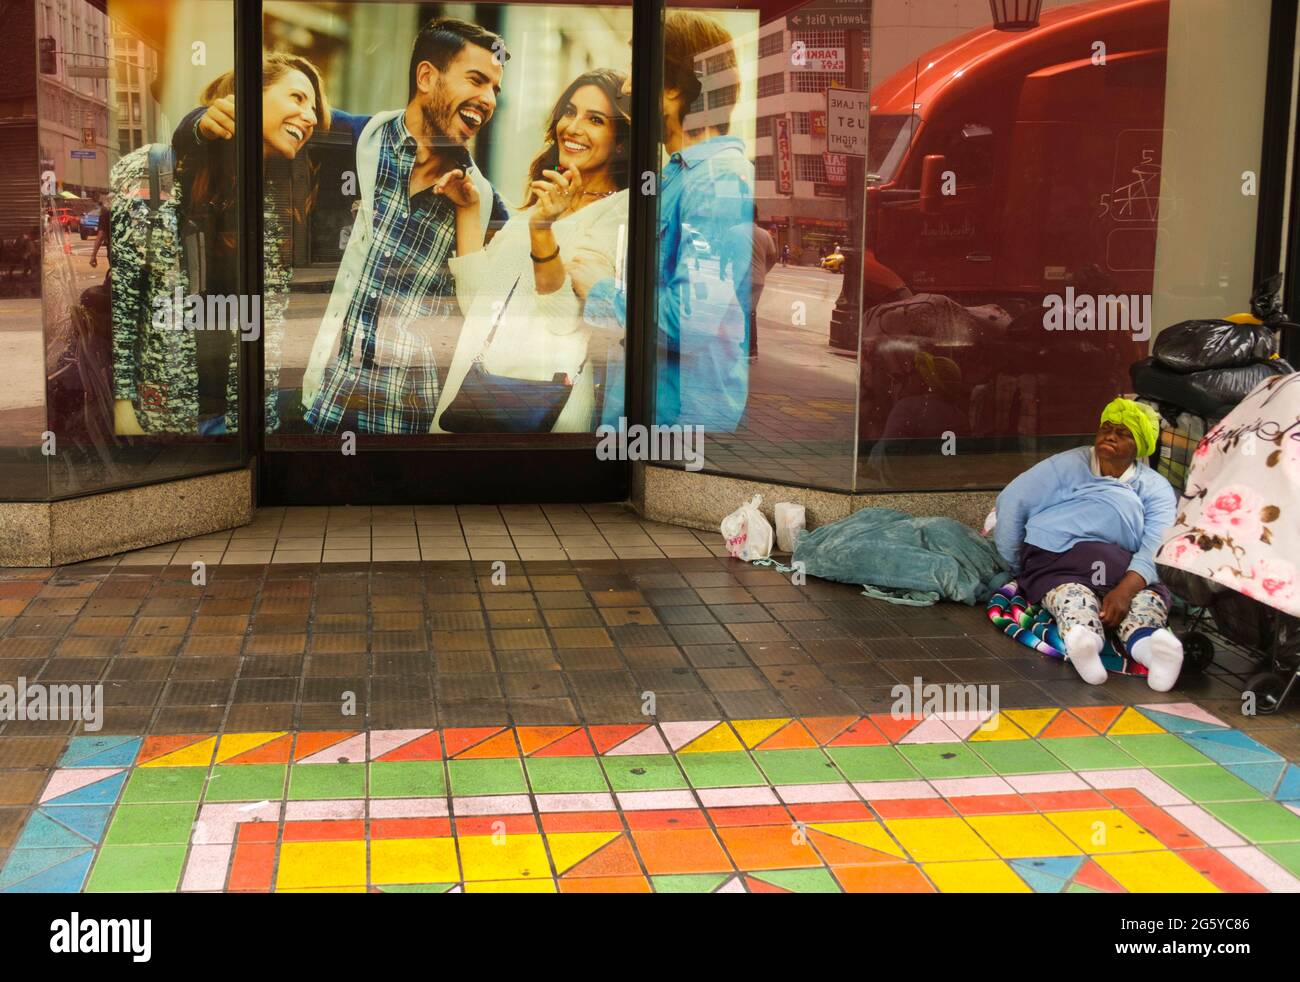 Homeless on Broadway, downtown Los Angeles, California, United States of America Stock Photo